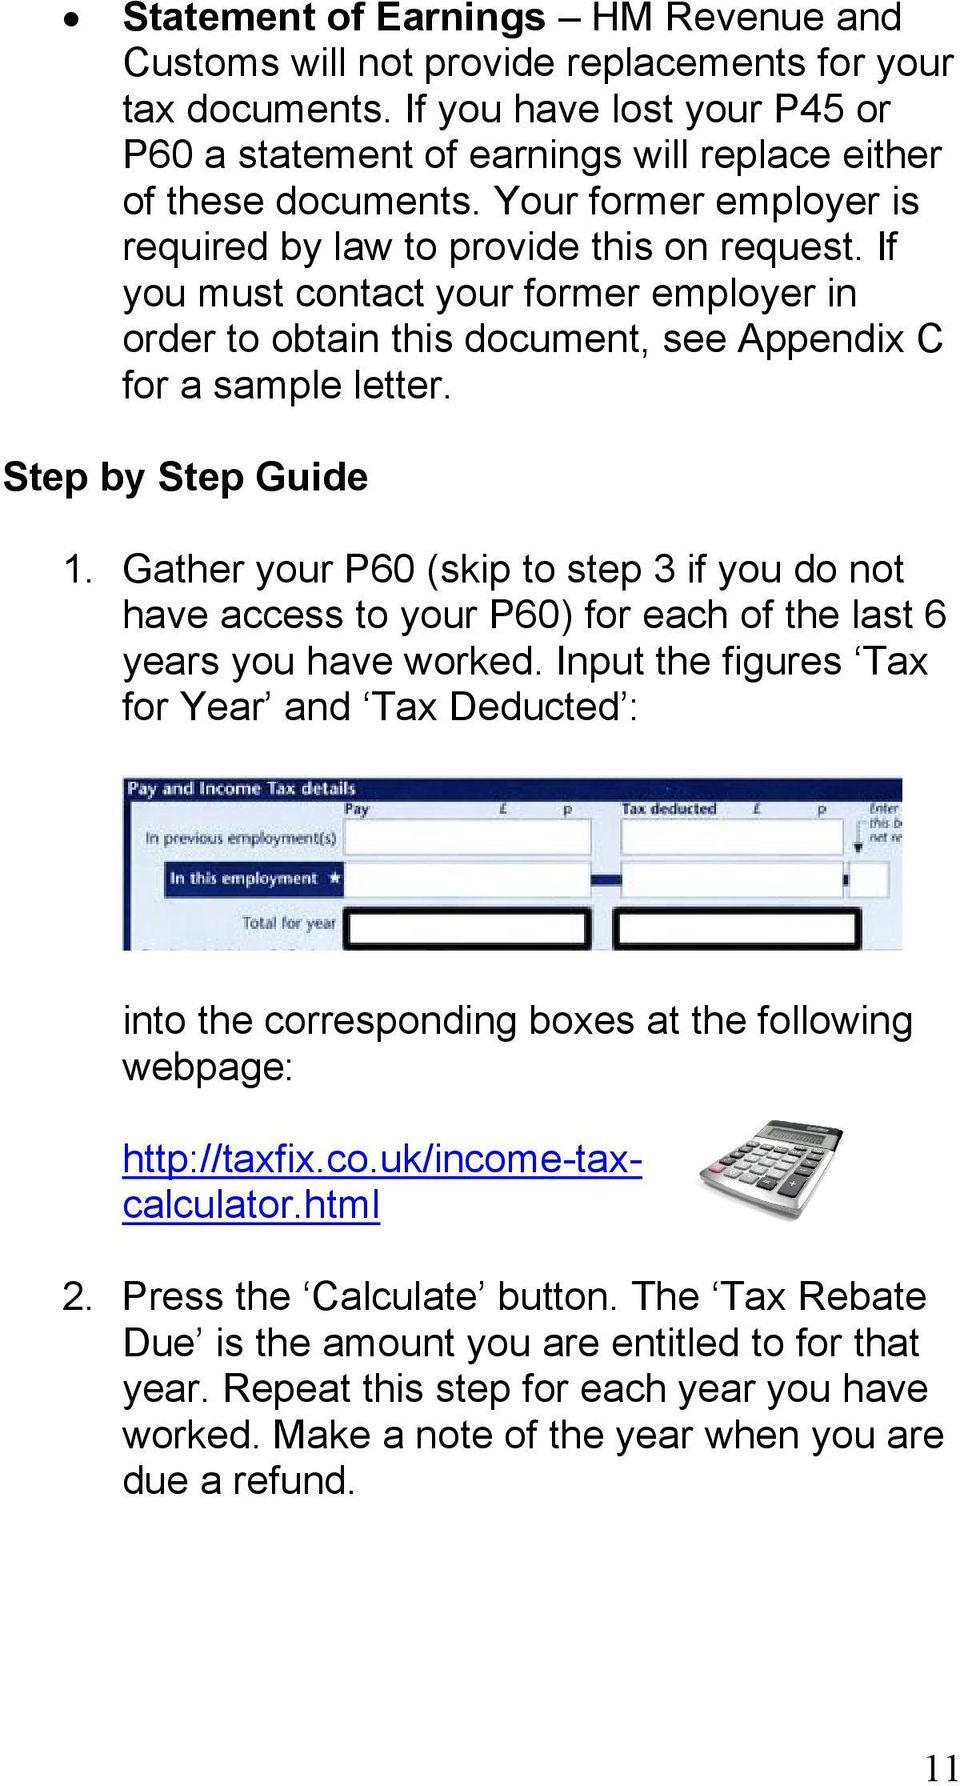 Gather your P60 (skip to step 3 if you do not have access to your P60) for each of the last 6 years you have worked.